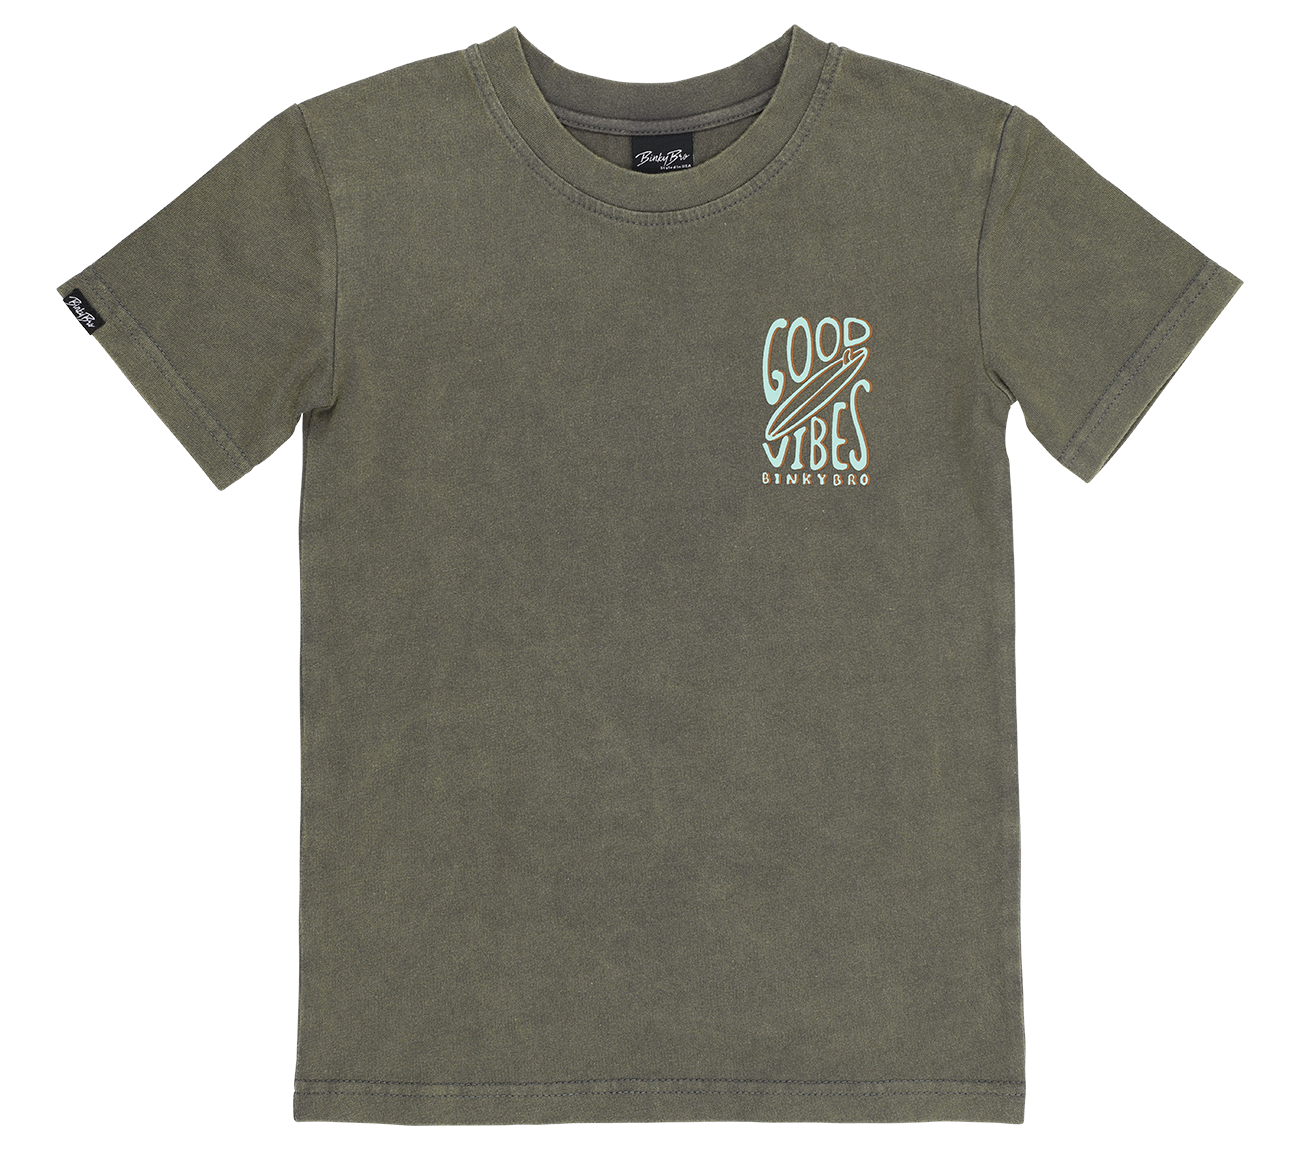 Good Vibes T-Shirt - BBro Tea for Three: A Children's Boutique